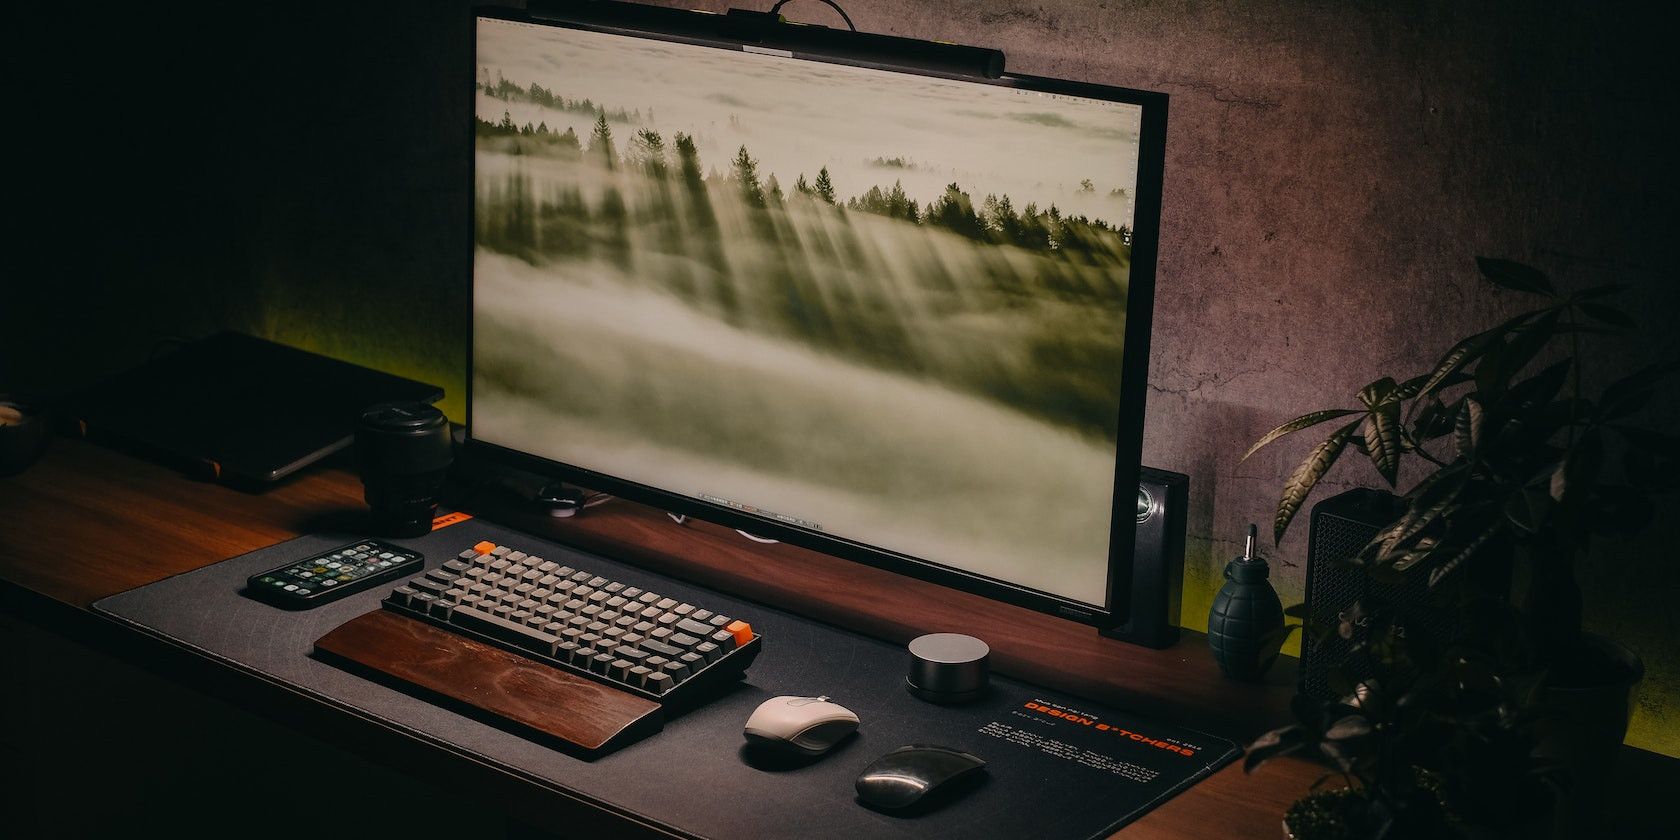 a desktop computer with a big display, keyboard, and mouse